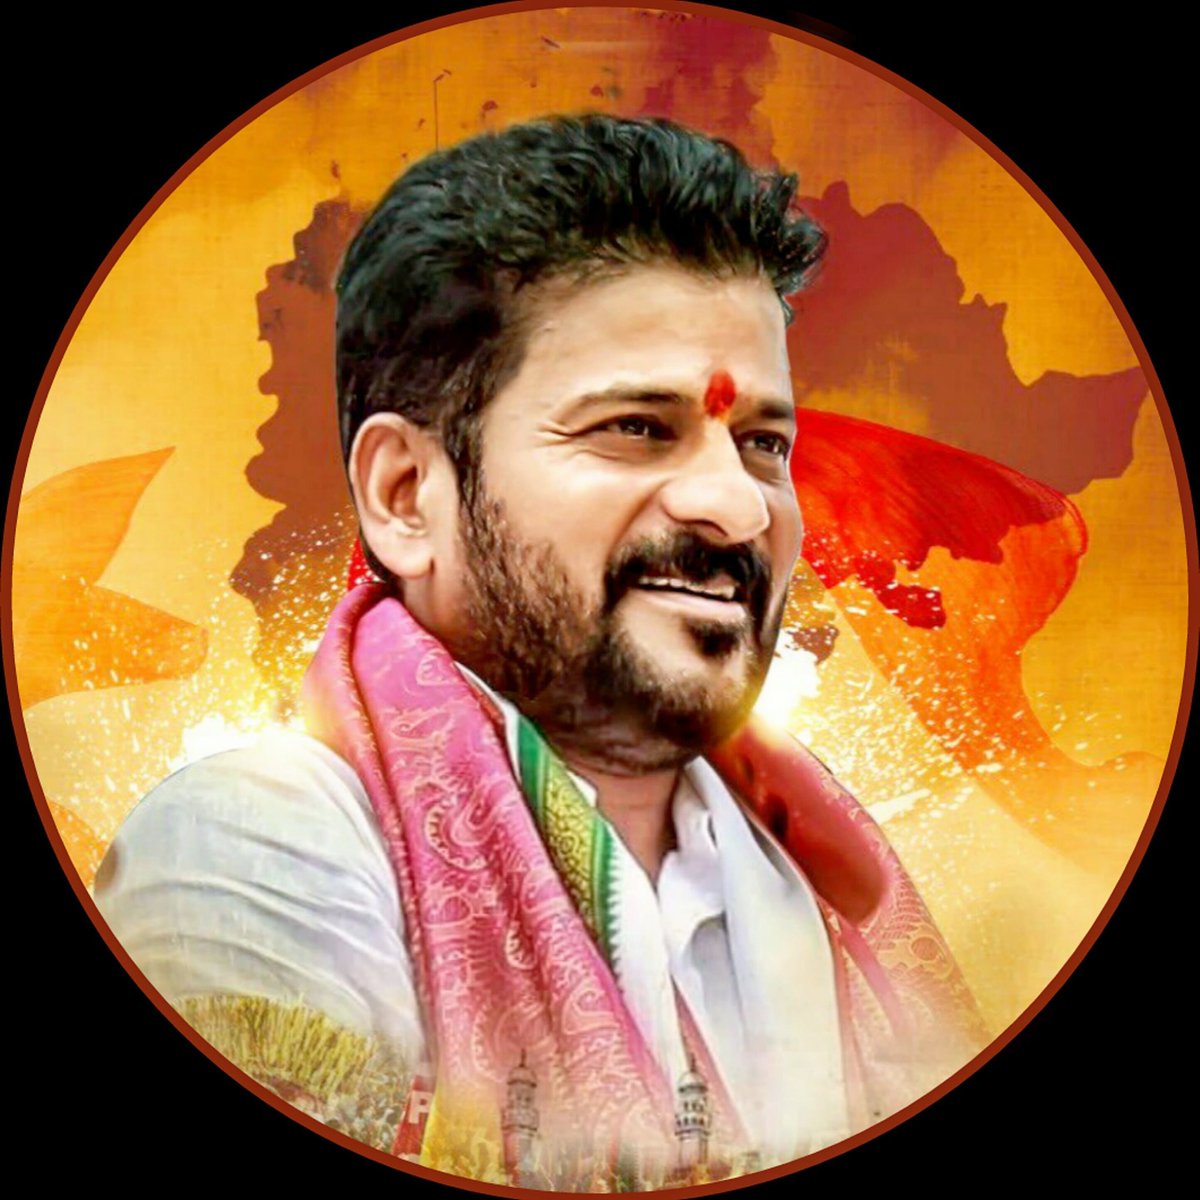 Dear Chief Minister @revanth_anumula Garu, congratulations on your new responsibility! Here's to a successful and impactful term leading Telangana. Best wishes 💐 #RevanthReddycm #CMofTelangana